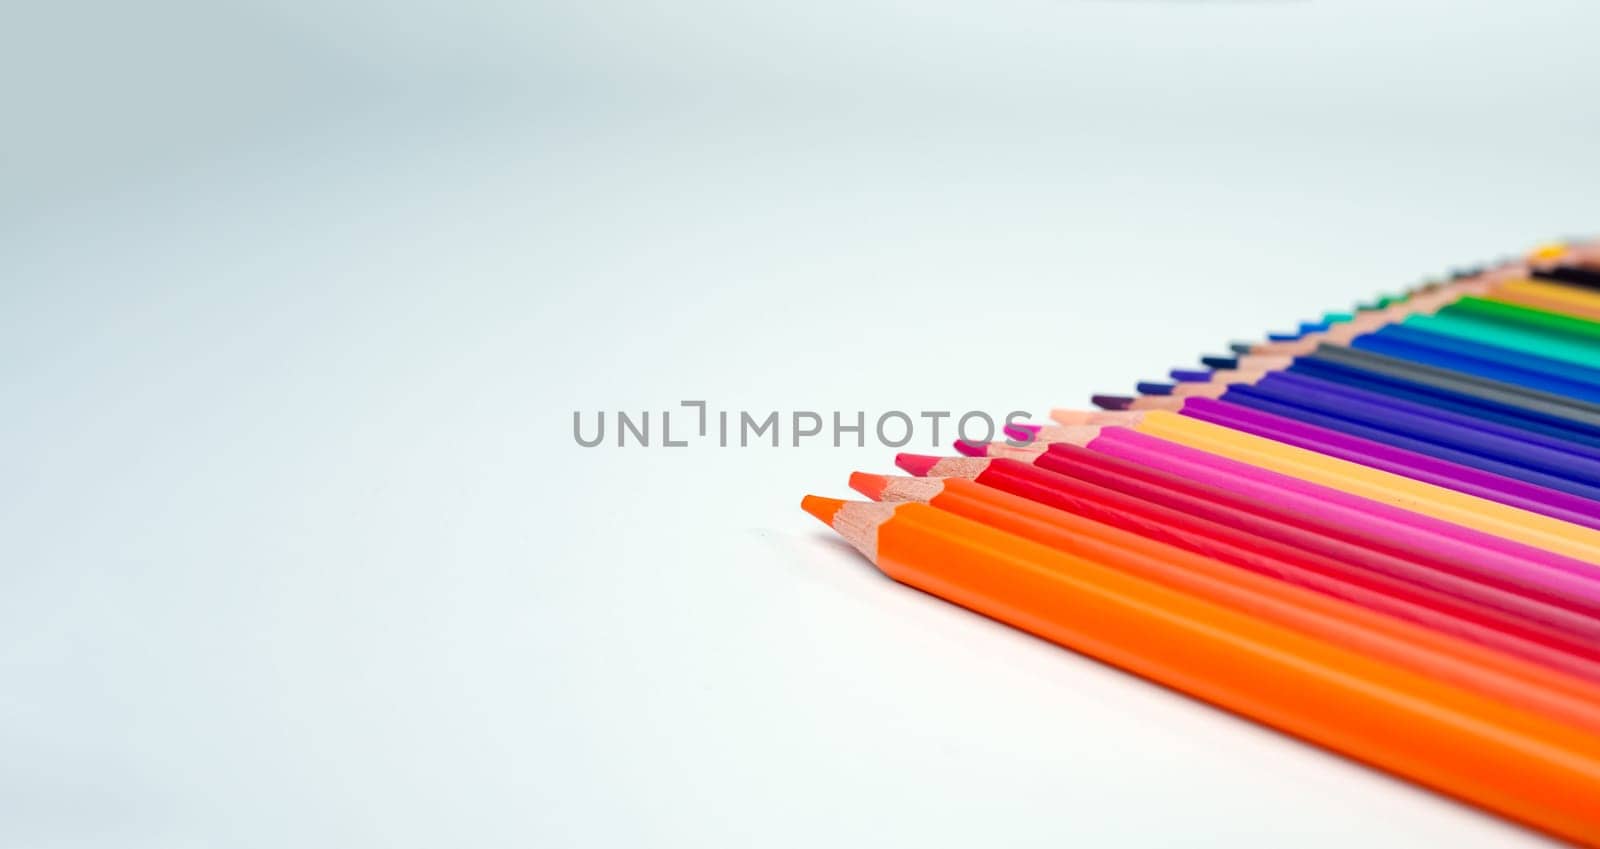 Set of colored pencils on a white background That is arranged in a bar graph, Color pencils on white background, Close up, seamless colored pencils row with wave on lower side, line pencils. by Unimages2527